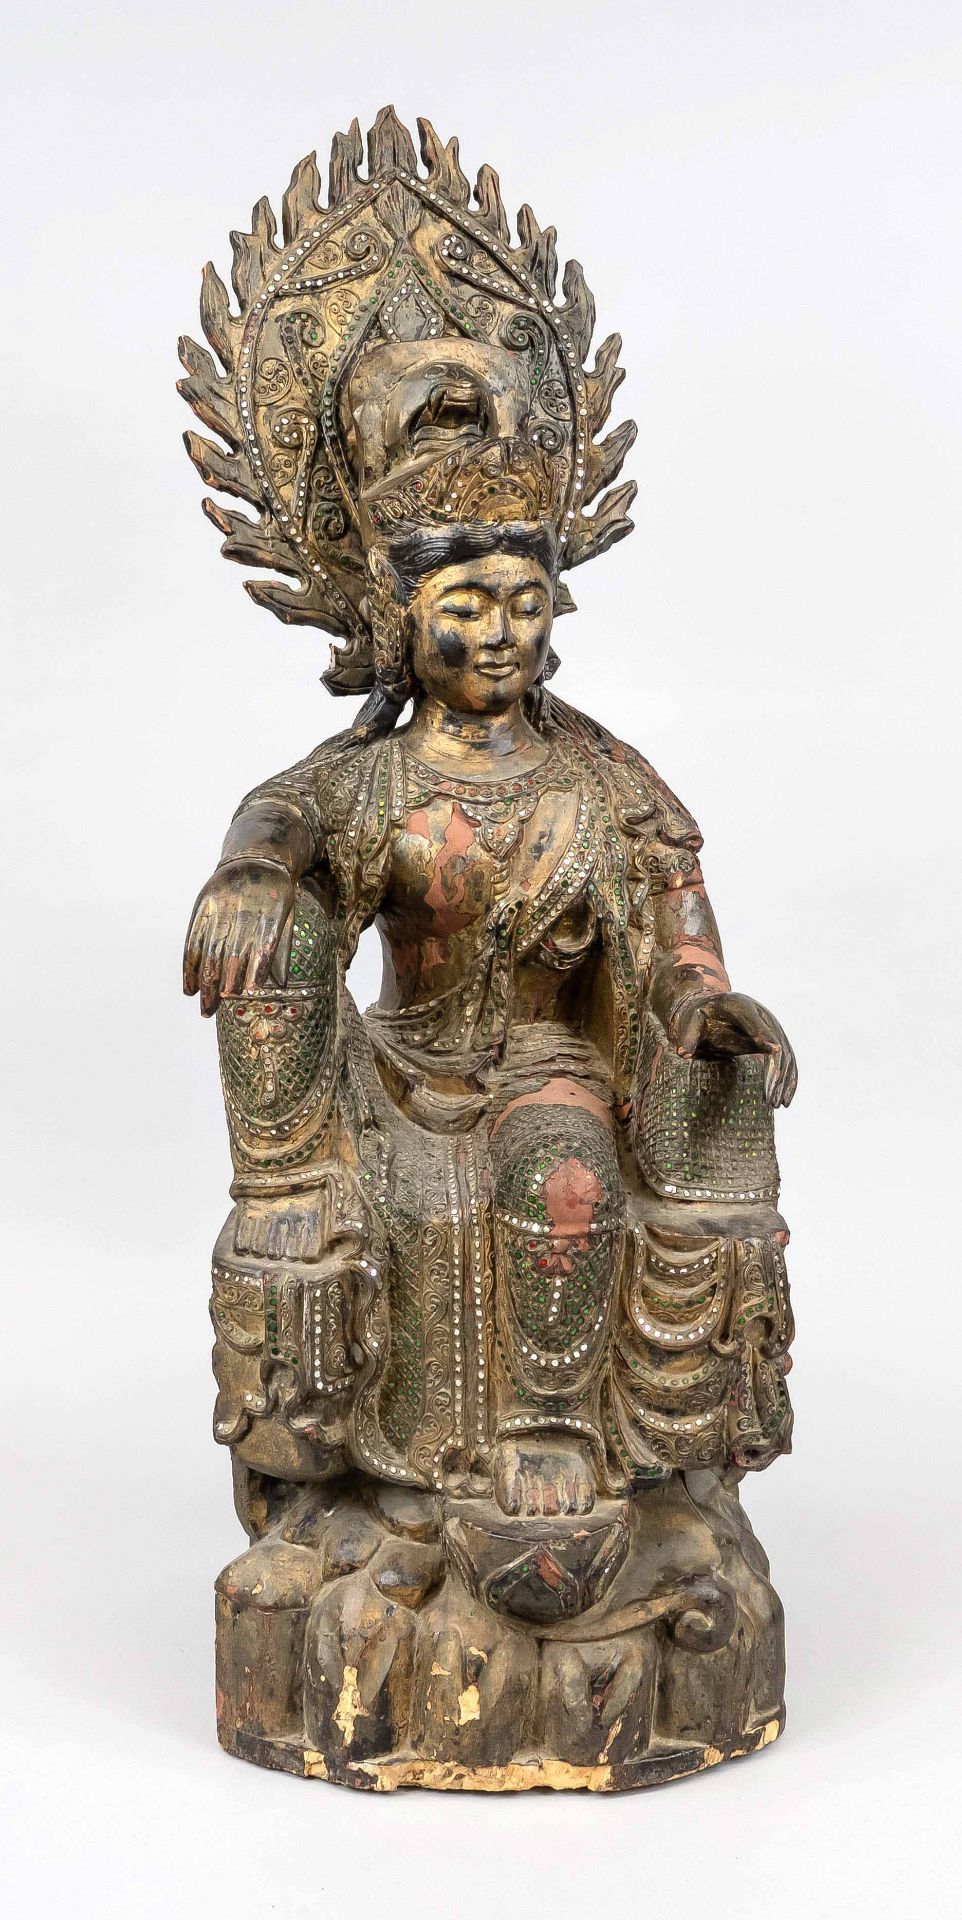 Water-moon Avalokiteshvara on rock throne, China, 20th c., wood-carved merciful Guanyin in so-called